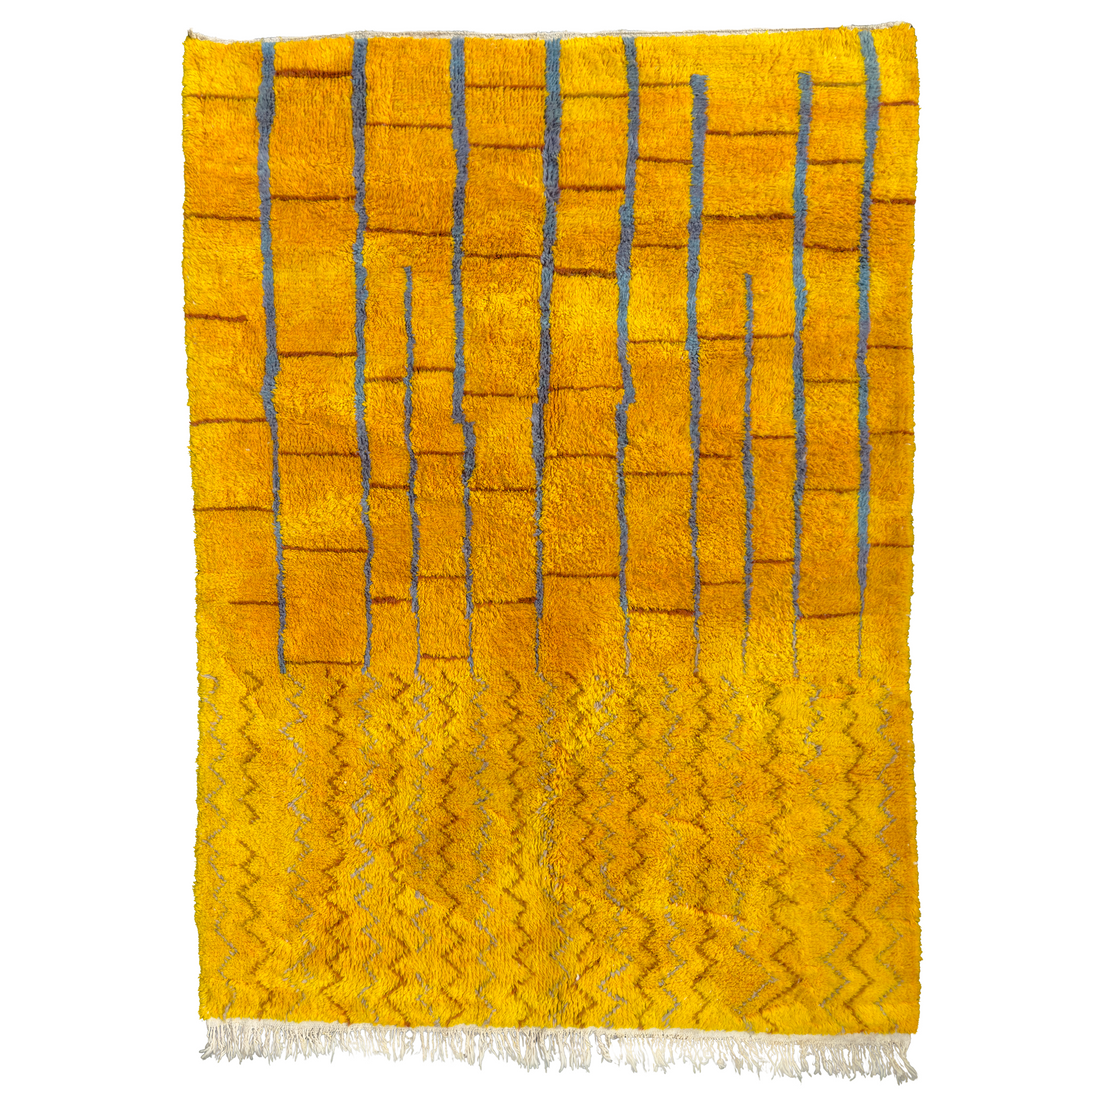 This rug features a captivating design with a vibrant golden yellow base and intricate grey and brown linework. The plush pile height and dense knots ensure both comfort and durability.